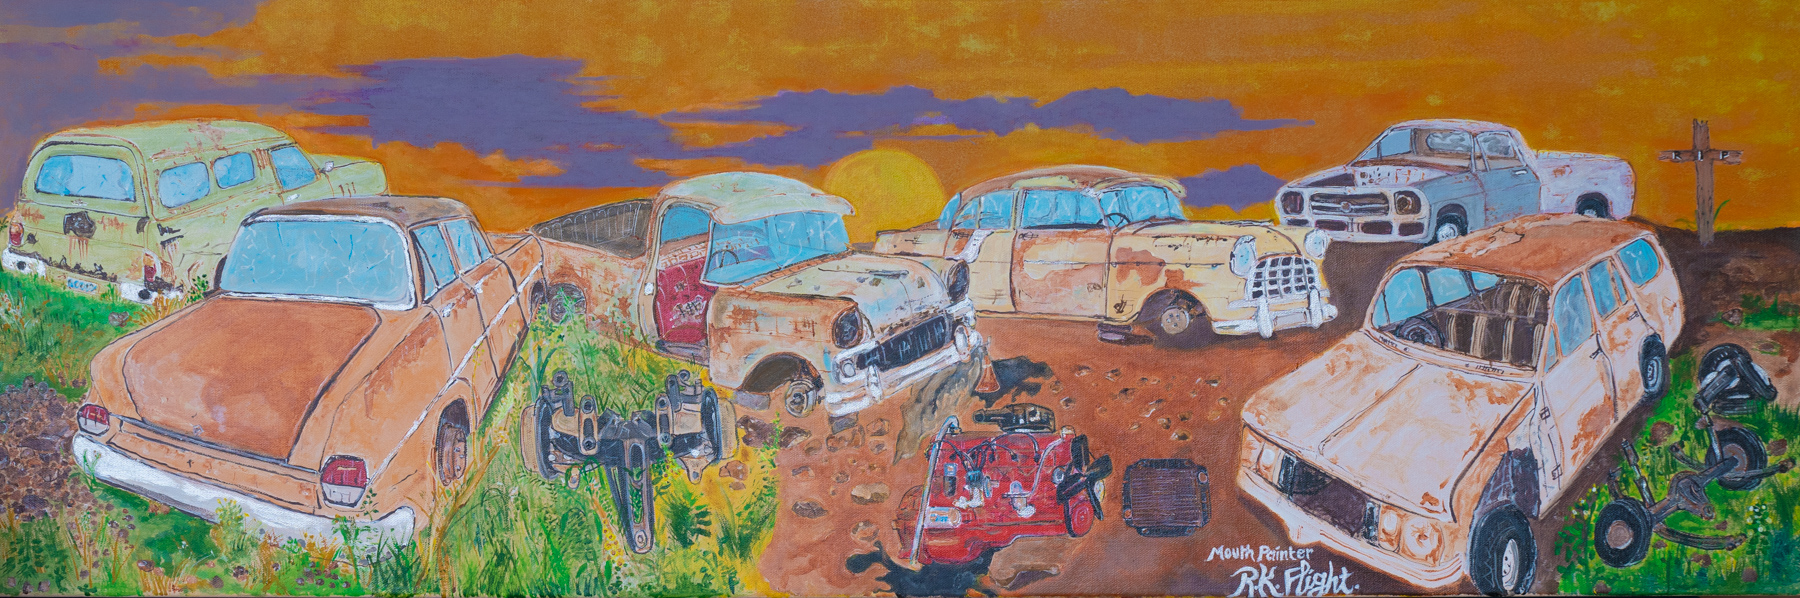 Painting of rusted old cars with an orange and purple skye